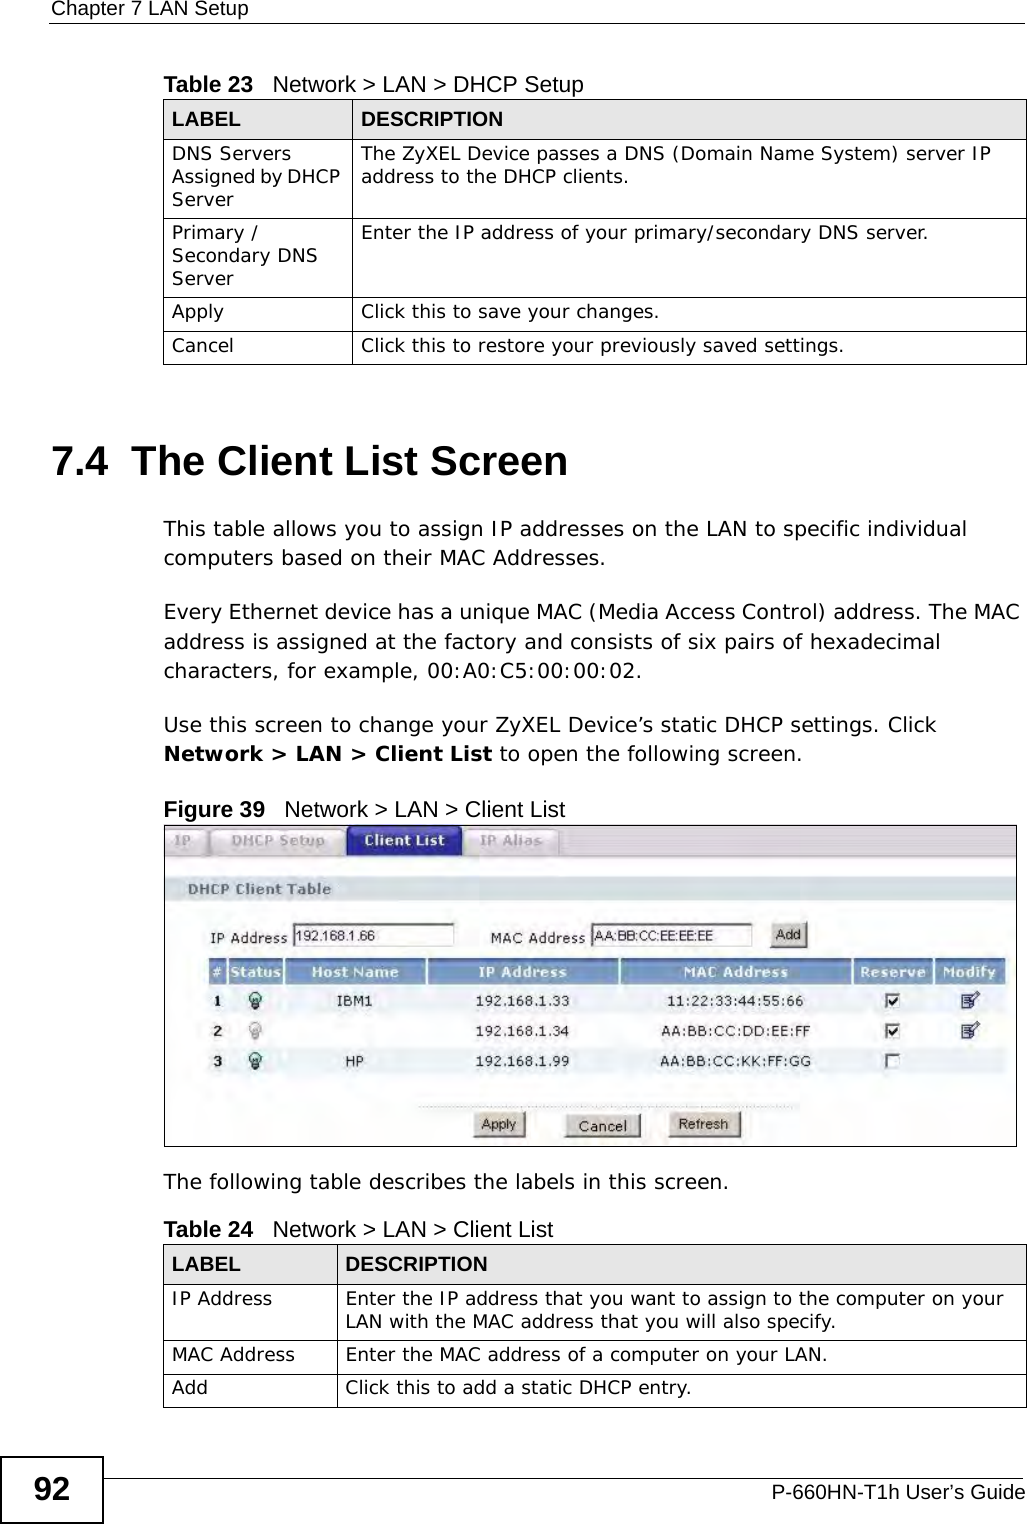 Chapter 7 LAN SetupP-660HN-T1h User’s Guide927.4  The Client List ScreenThis table allows you to assign IP addresses on the LAN to specific individual computers based on their MAC Addresses. Every Ethernet device has a unique MAC (Media Access Control) address. The MAC address is assigned at the factory and consists of six pairs of hexadecimal characters, for example, 00:A0:C5:00:00:02.Use this screen to change your ZyXEL Device’s static DHCP settings. Click Network &gt; LAN &gt; Client List to open the following screen.Figure 39   Network &gt; LAN &gt; Client List The following table describes the labels in this screen.DNS Servers Assigned by DHCP ServerThe ZyXEL Device passes a DNS (Domain Name System) server IP address to the DHCP clients. Primary /Secondary DNS ServerEnter the IP address of your primary/secondary DNS server.Apply Click this to save your changes.Cancel Click this to restore your previously saved settings.Table 23   Network &gt; LAN &gt; DHCP Setup LABEL DESCRIPTIONTable 24   Network &gt; LAN &gt; Client ListLABEL DESCRIPTIONIP Address Enter the IP address that you want to assign to the computer on your LAN with the MAC address that you will also specify.MAC Address Enter the MAC address of a computer on your LAN.Add Click this to add a static DHCP entry. 